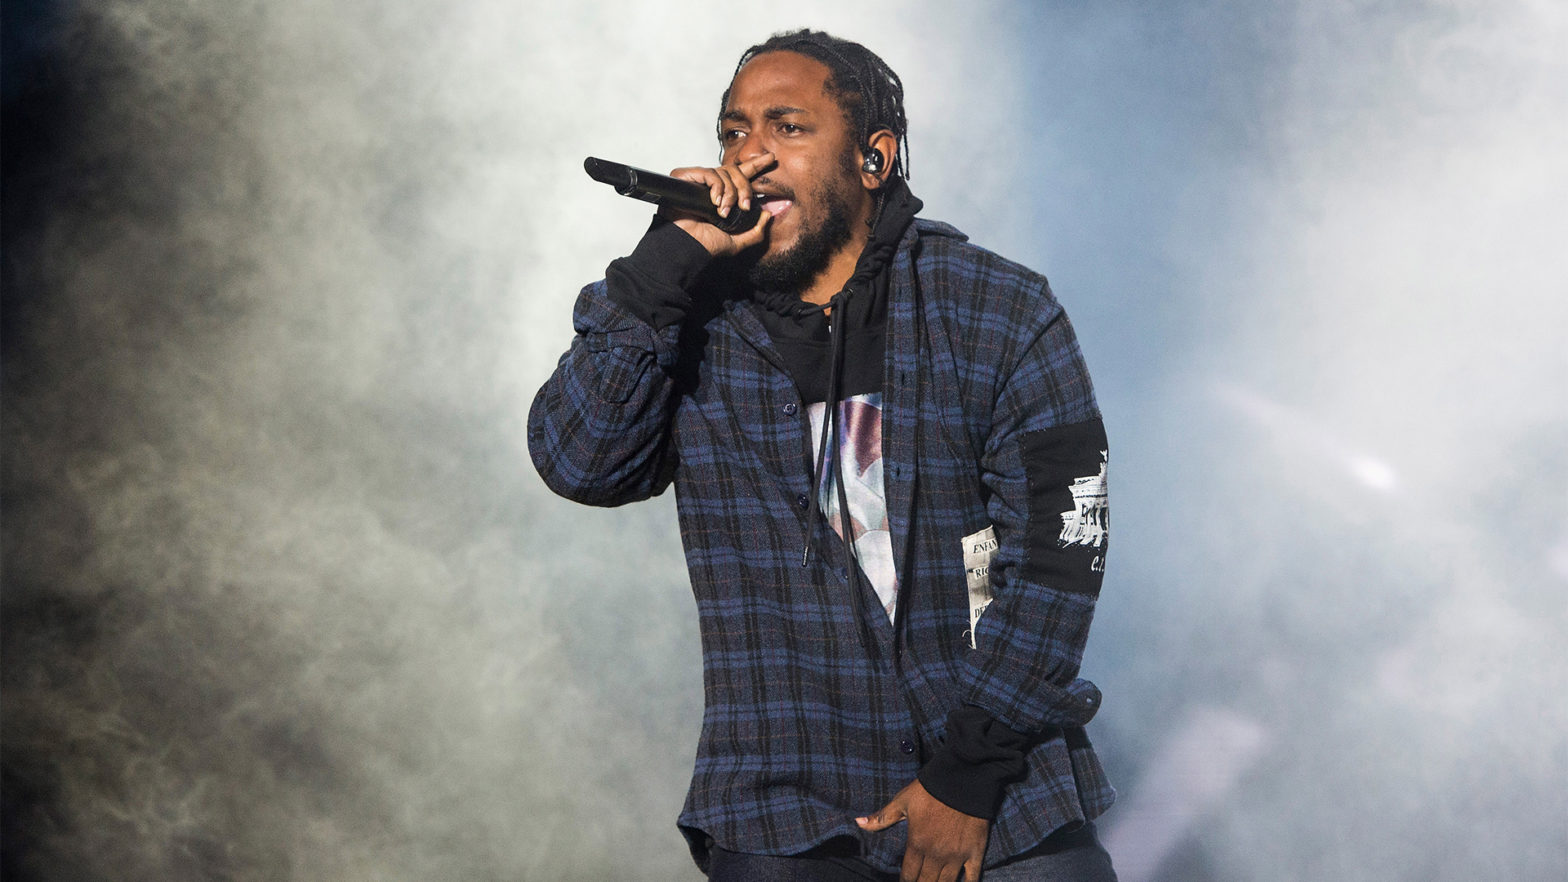 The Deepfake Technology That Morphed Kendrick Lamar Into Kanye West And More In 'The Heart Part 5' Visual